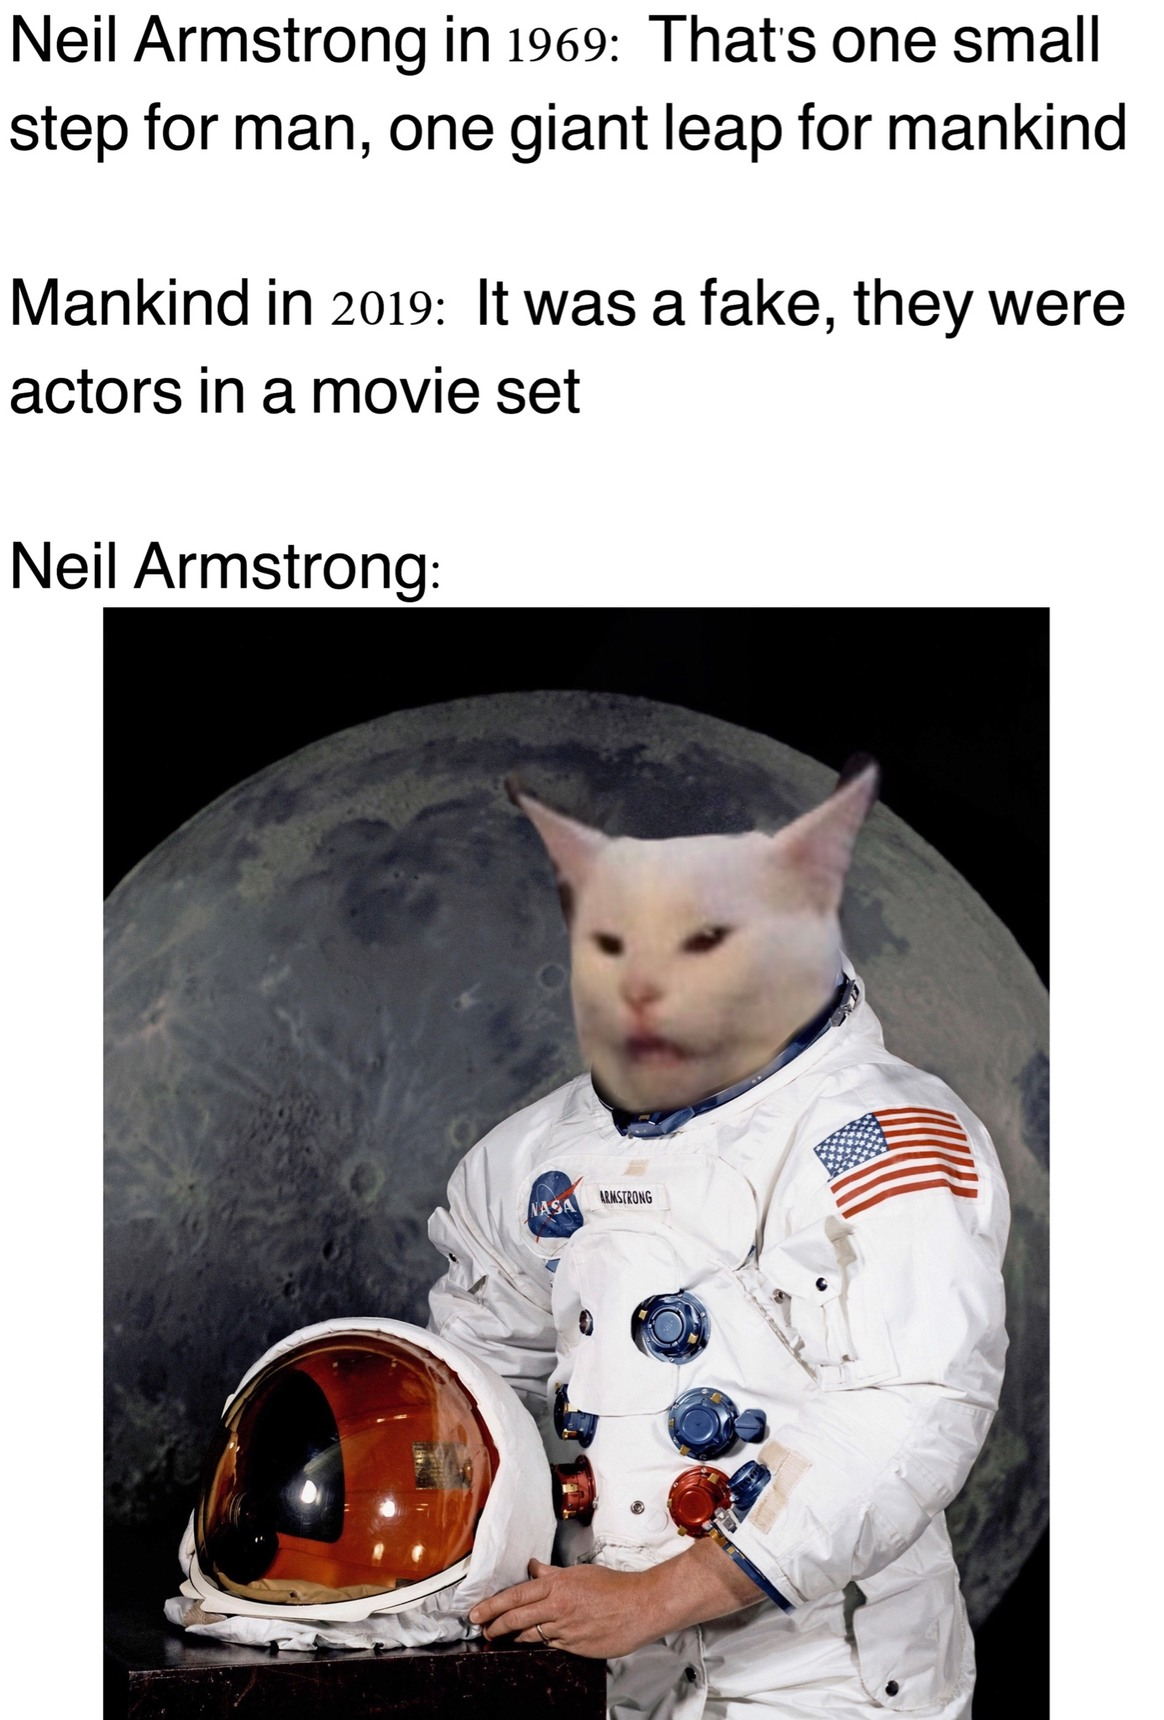 neil armstrong - Neil Armstrong in 1969 That's one small step for man, one giant leap for mankind Mankind in 2019 It was a fake, they were actors in a movie set Neil Armstrong